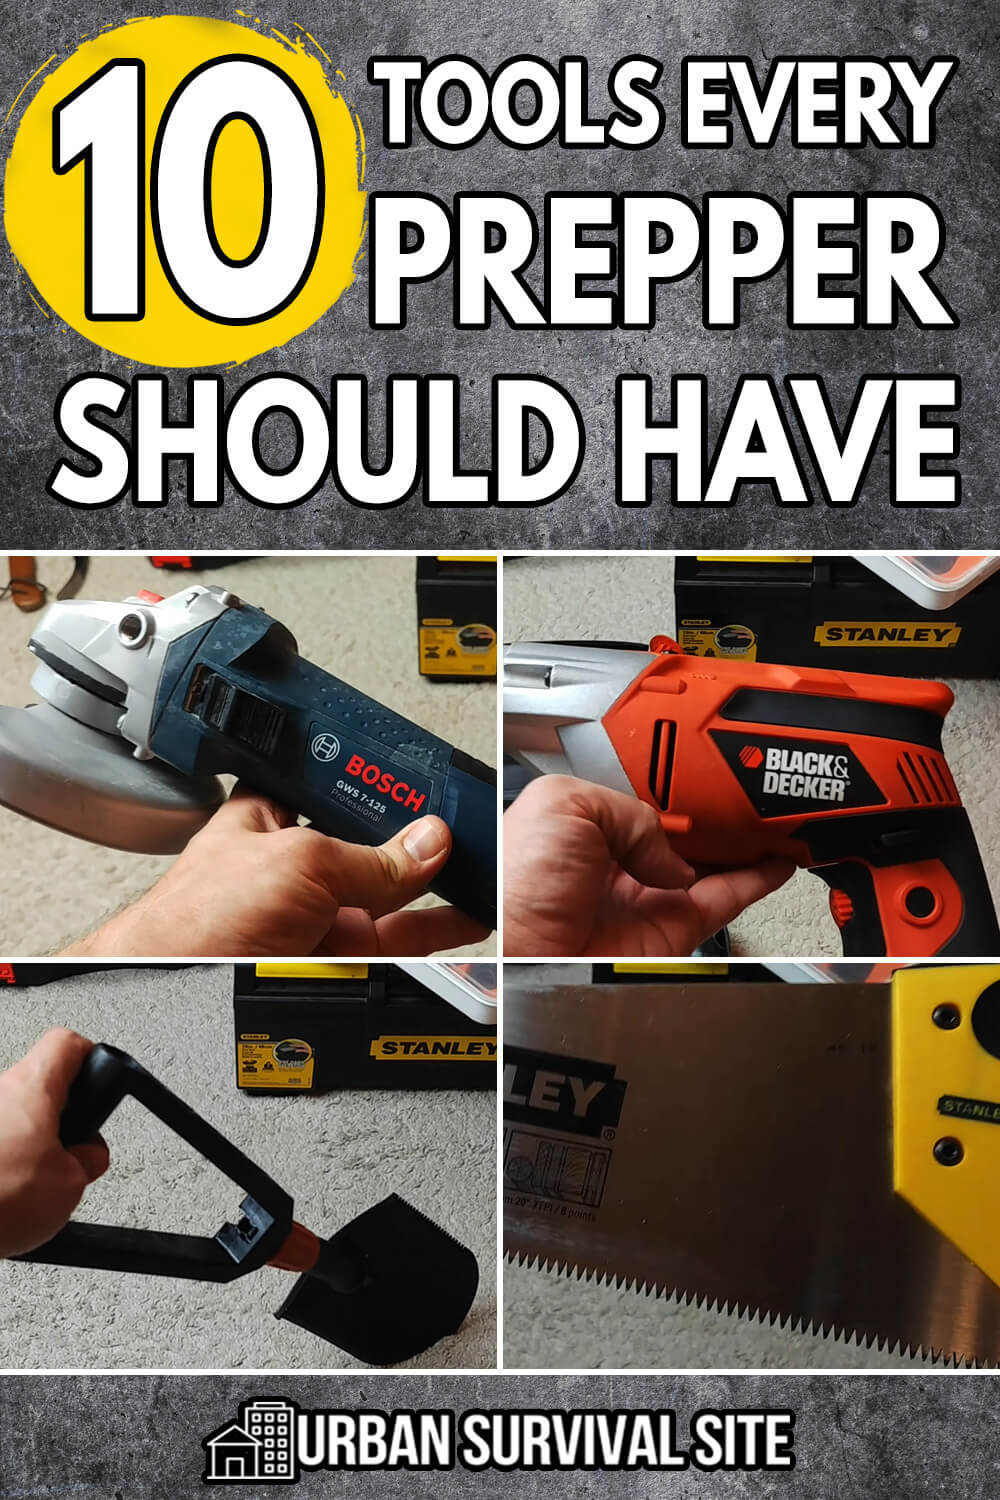 10 Tools Every Prepper Should Have